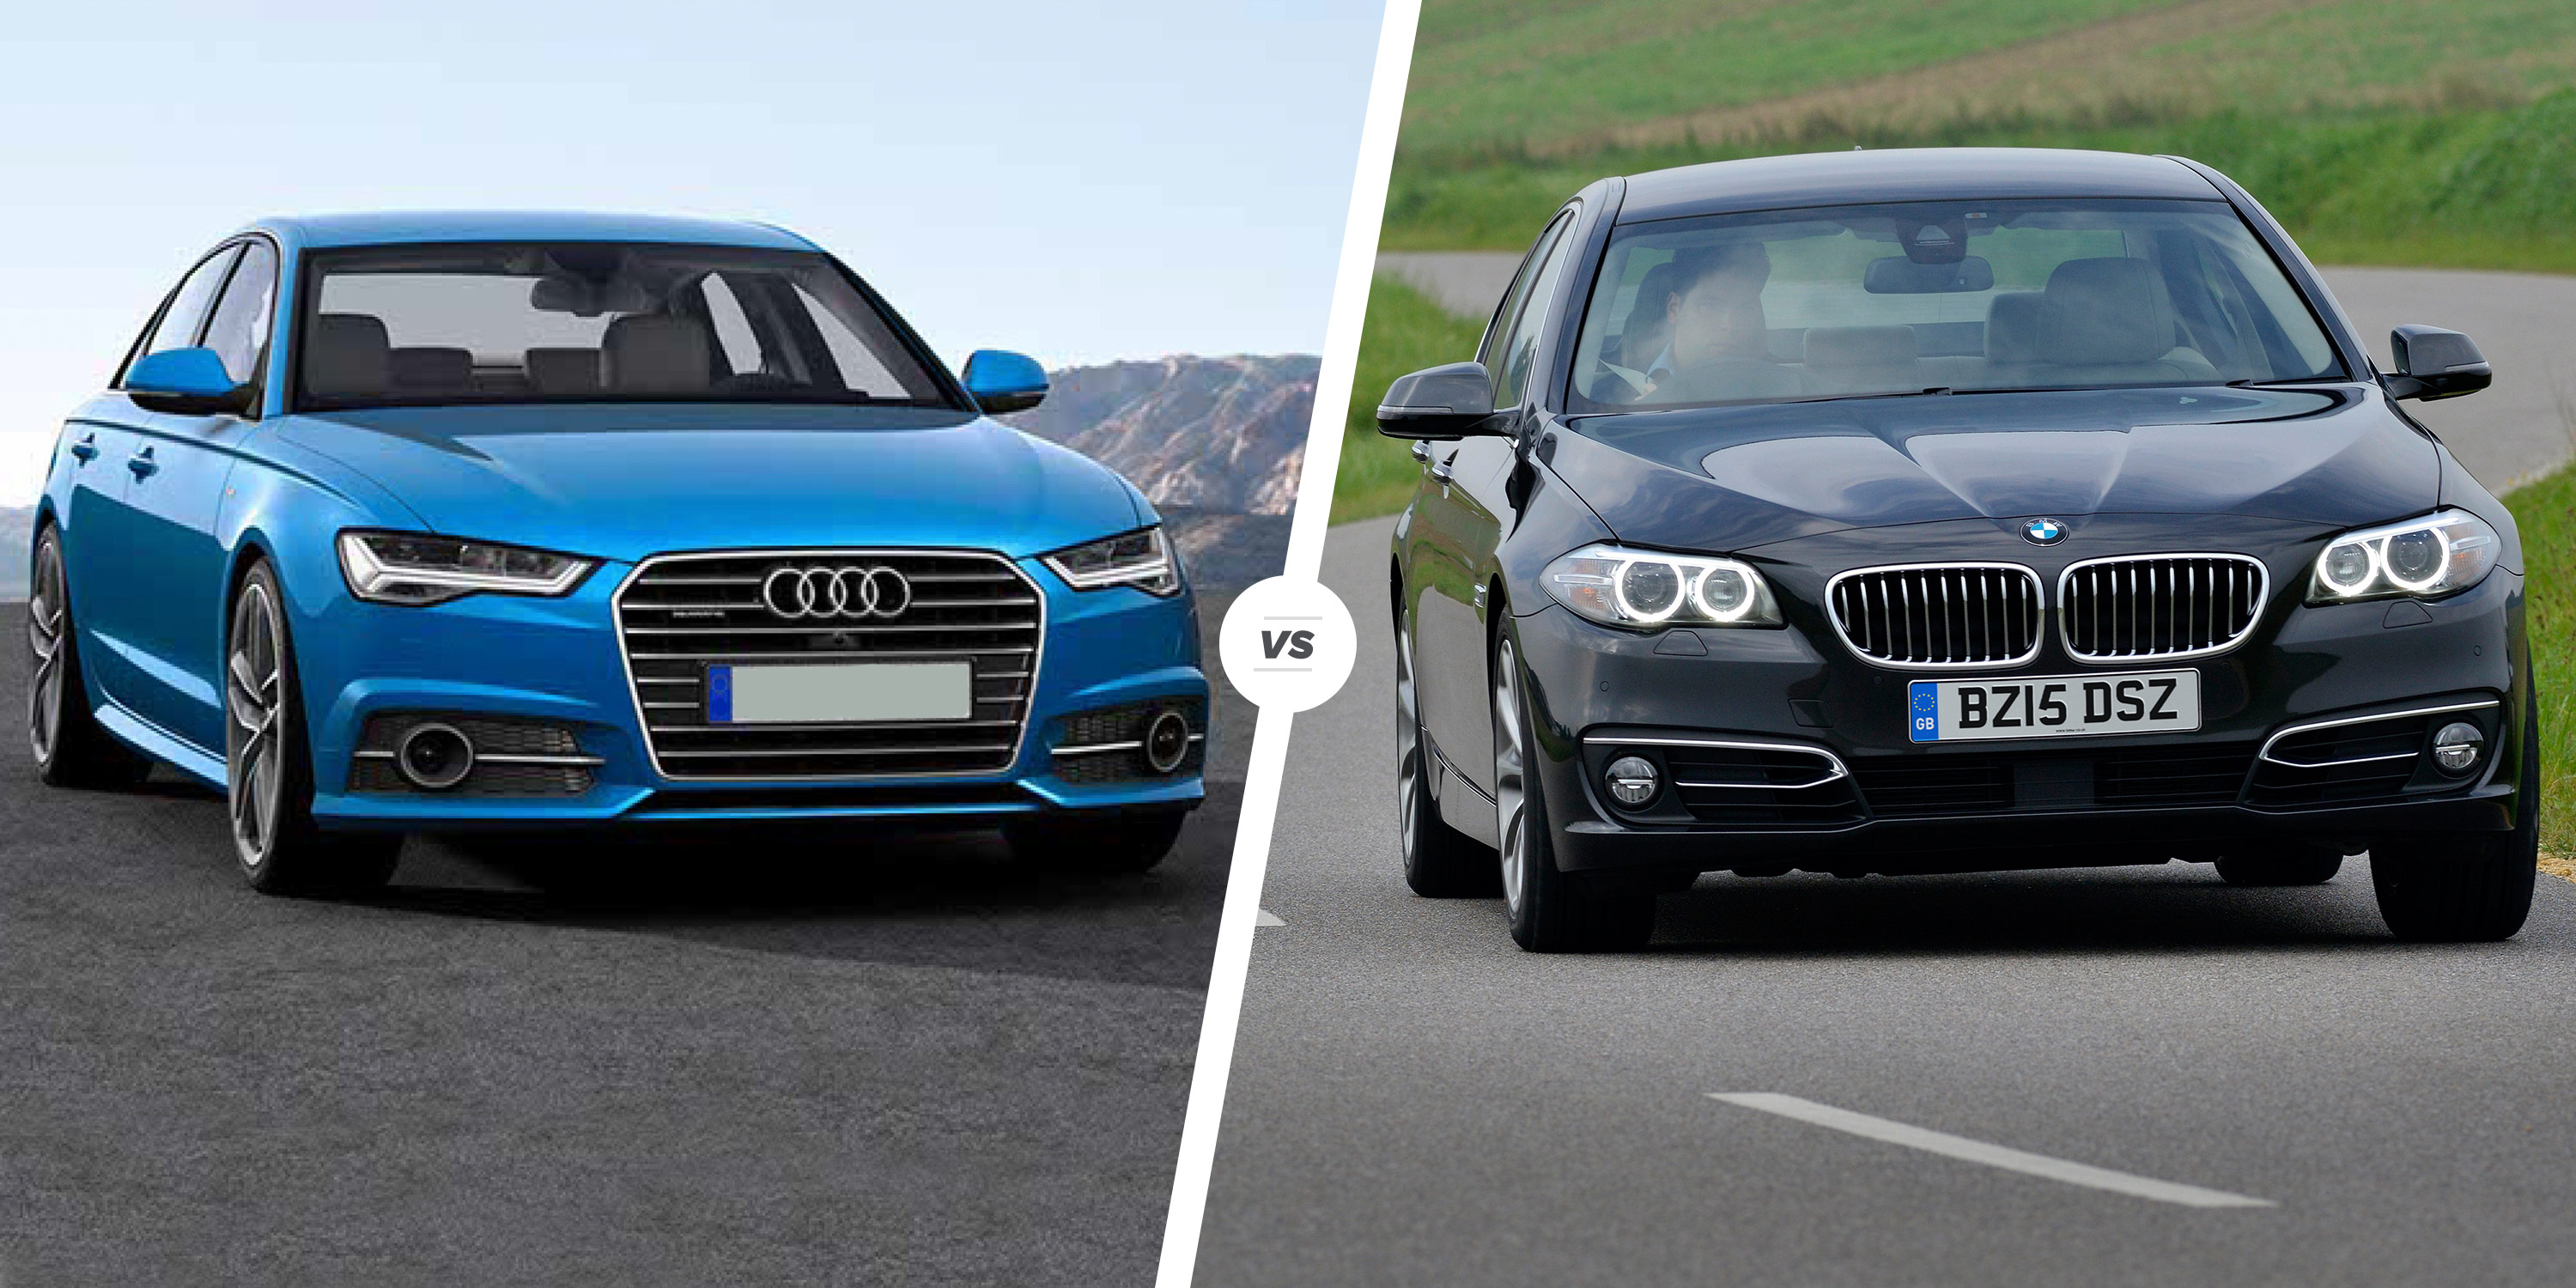 Audi A6 Vs Bmw 5 Series Side By Side Uk Comparison Carwow